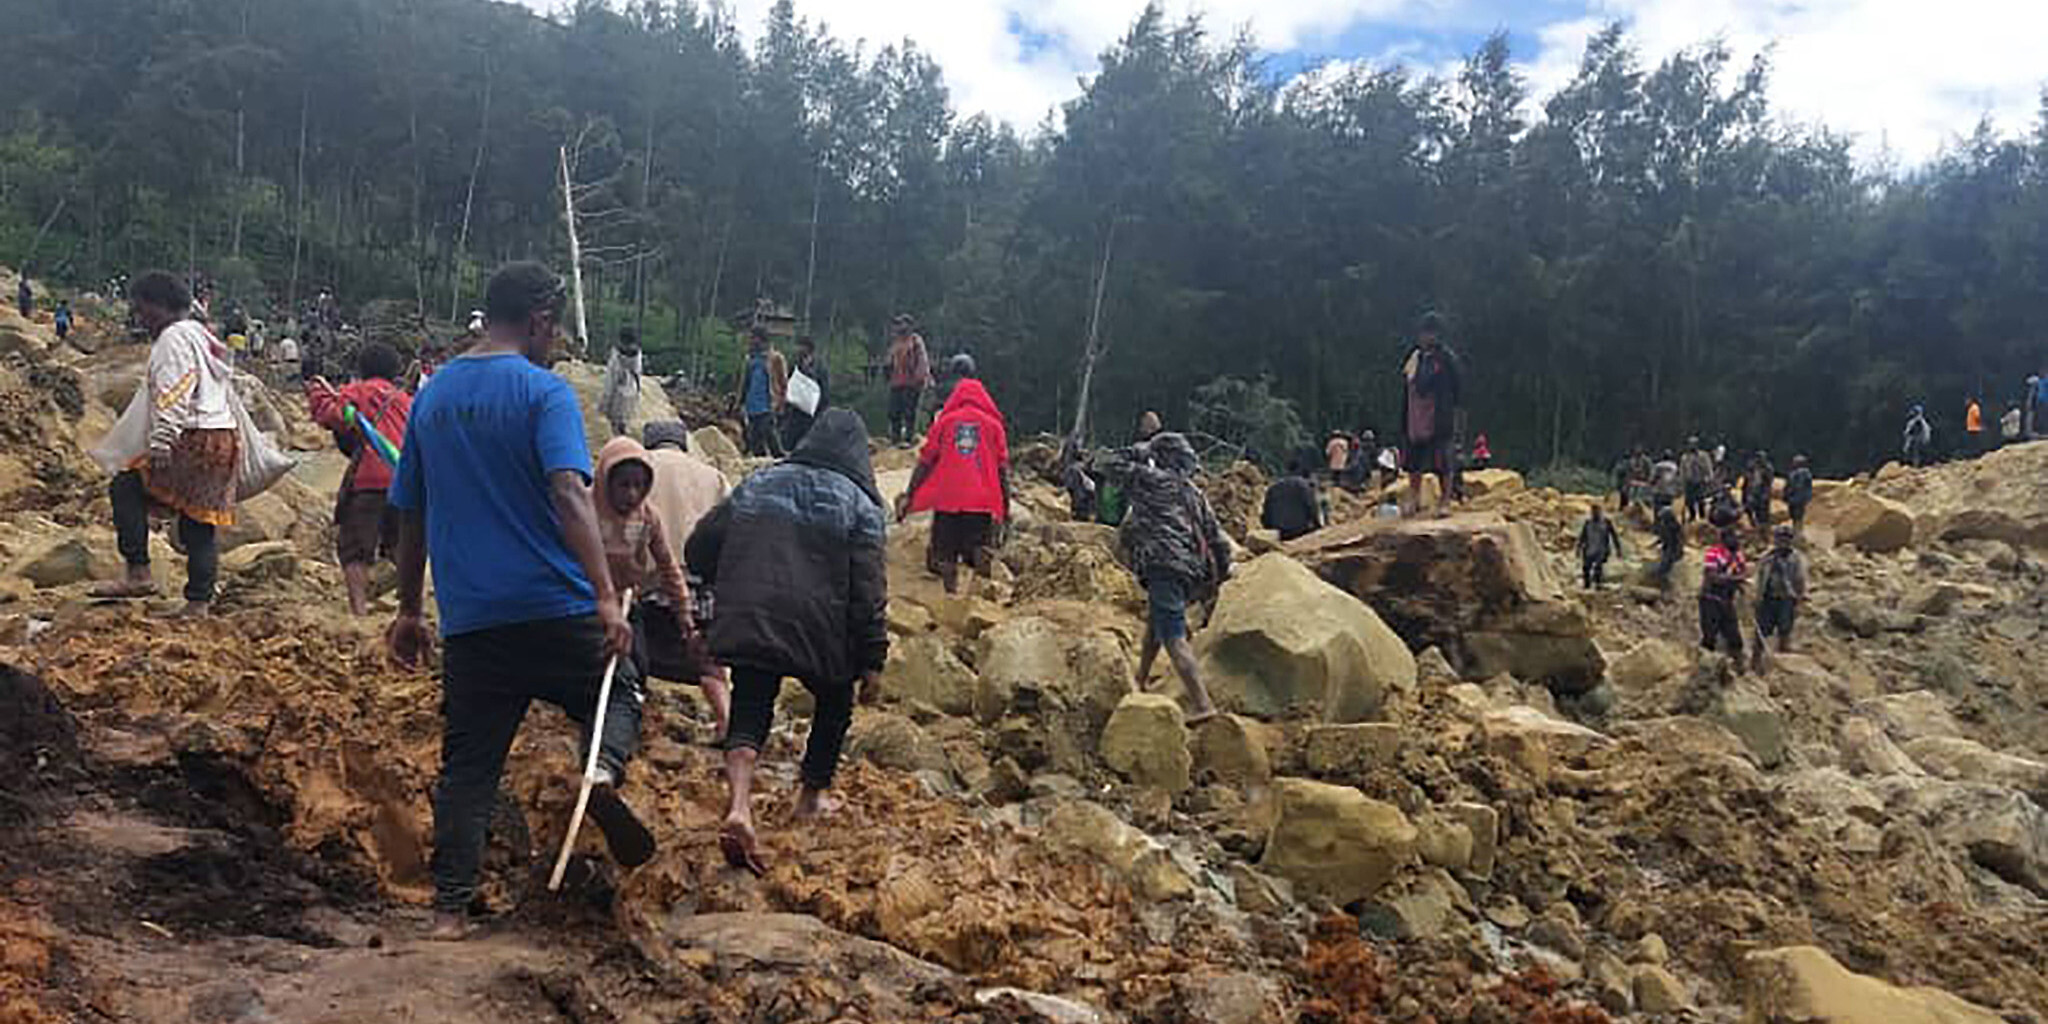 Fears rise of a second landslide and the spread of disease in Papua New Guinea